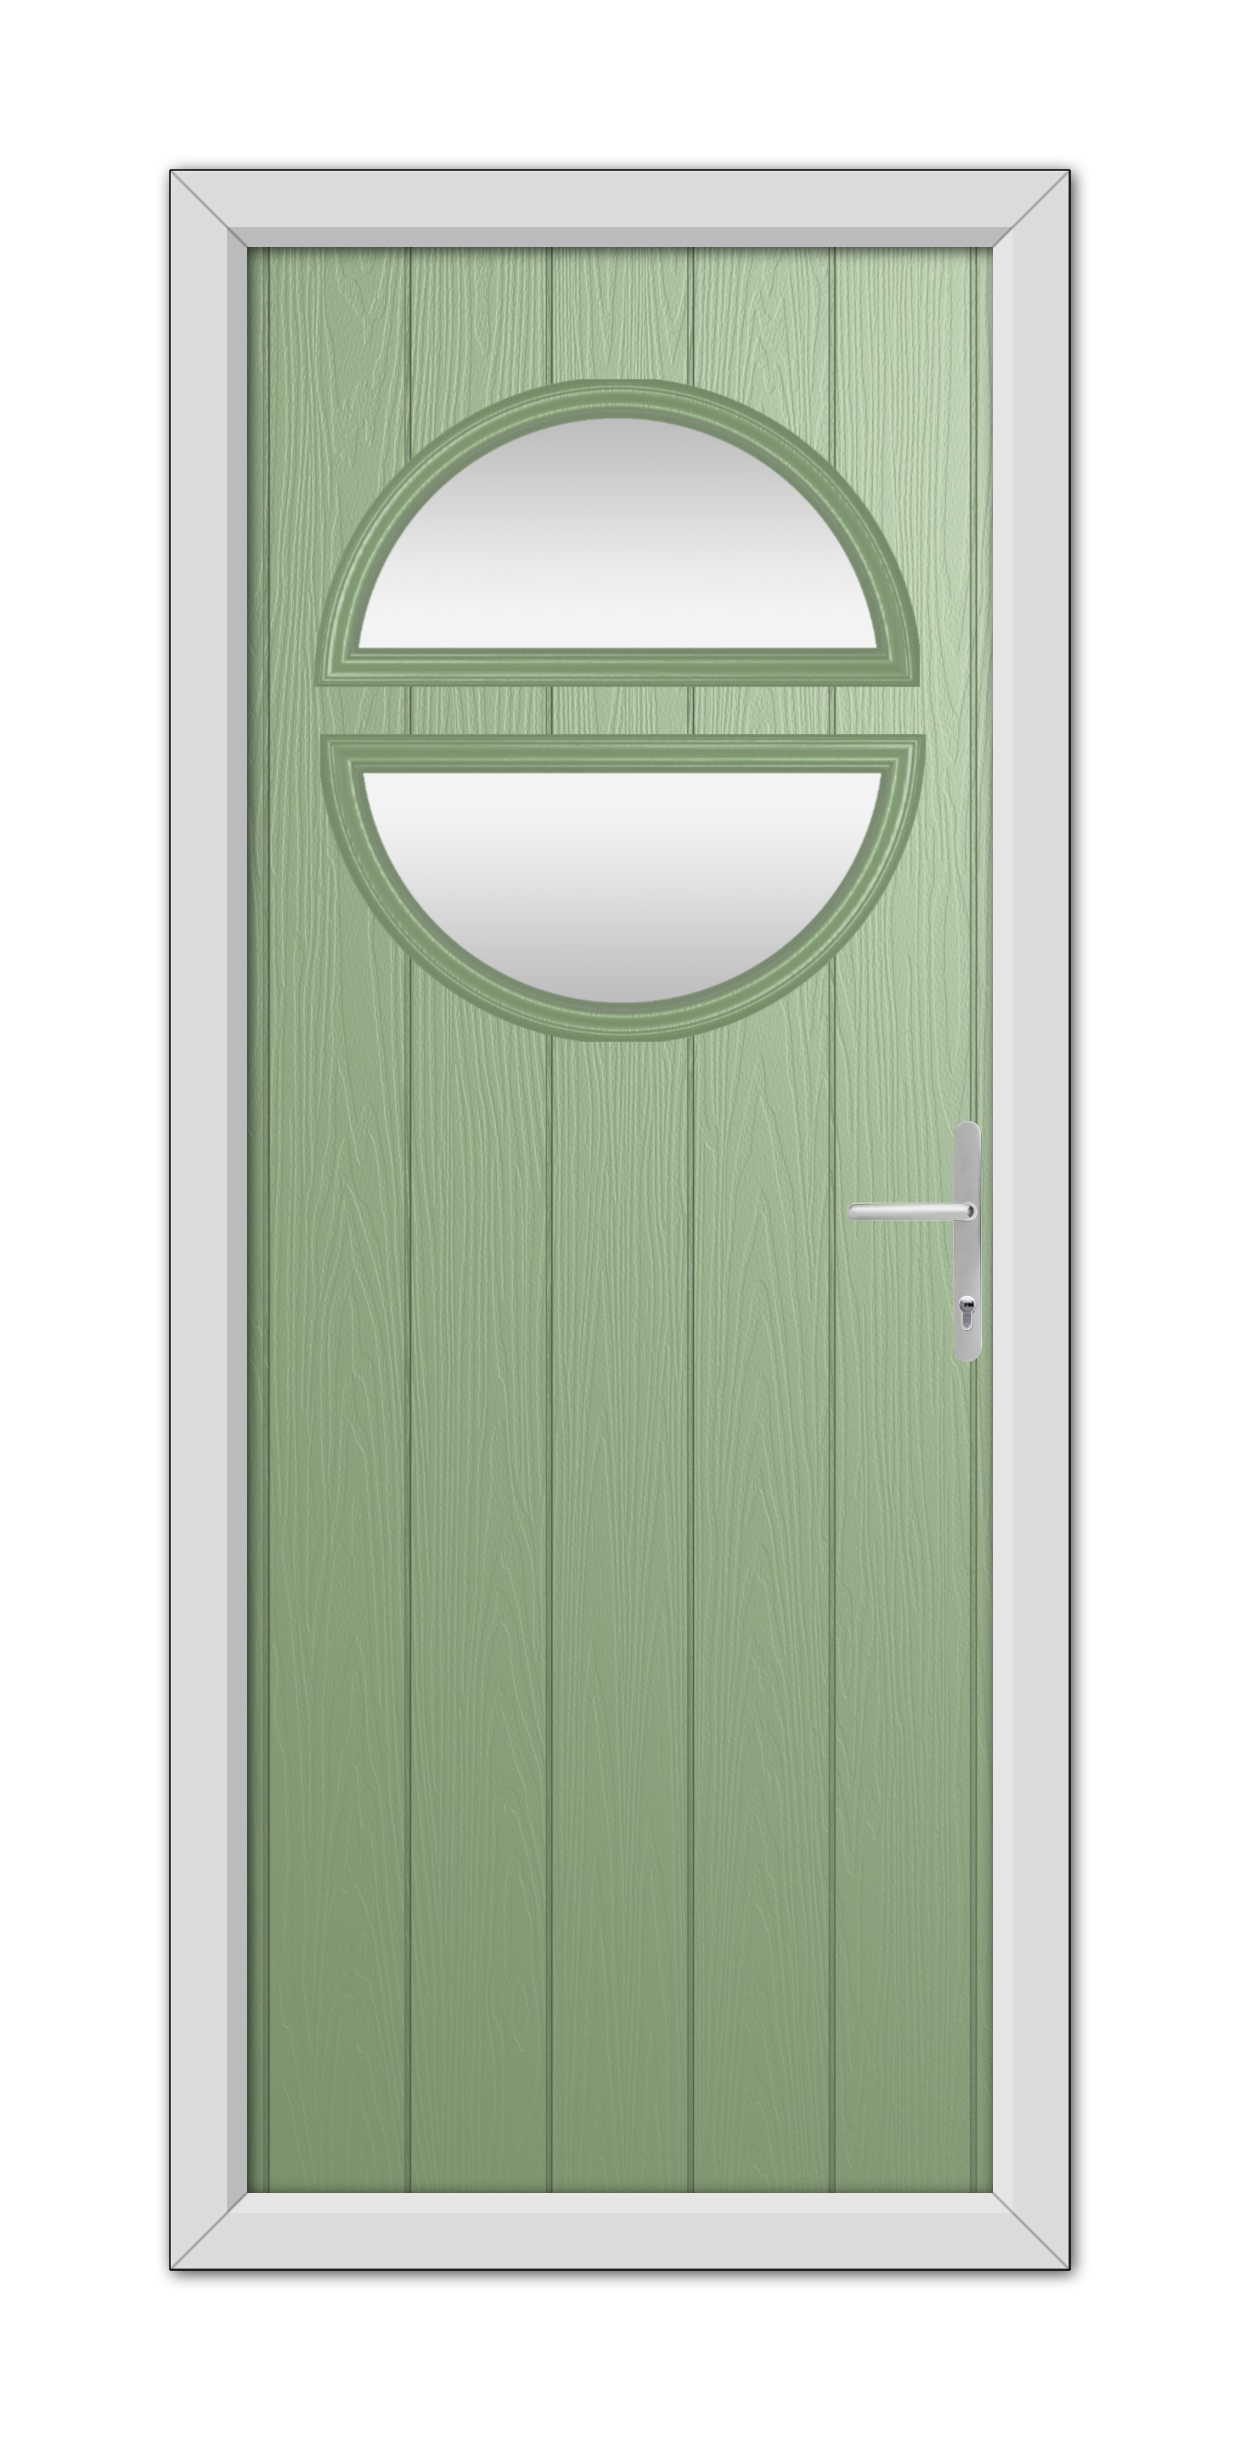 A Chartwell Green Kent Composite Door 48mm Timber Core with a horizontal oval glass window and a modern handle, framed in white.